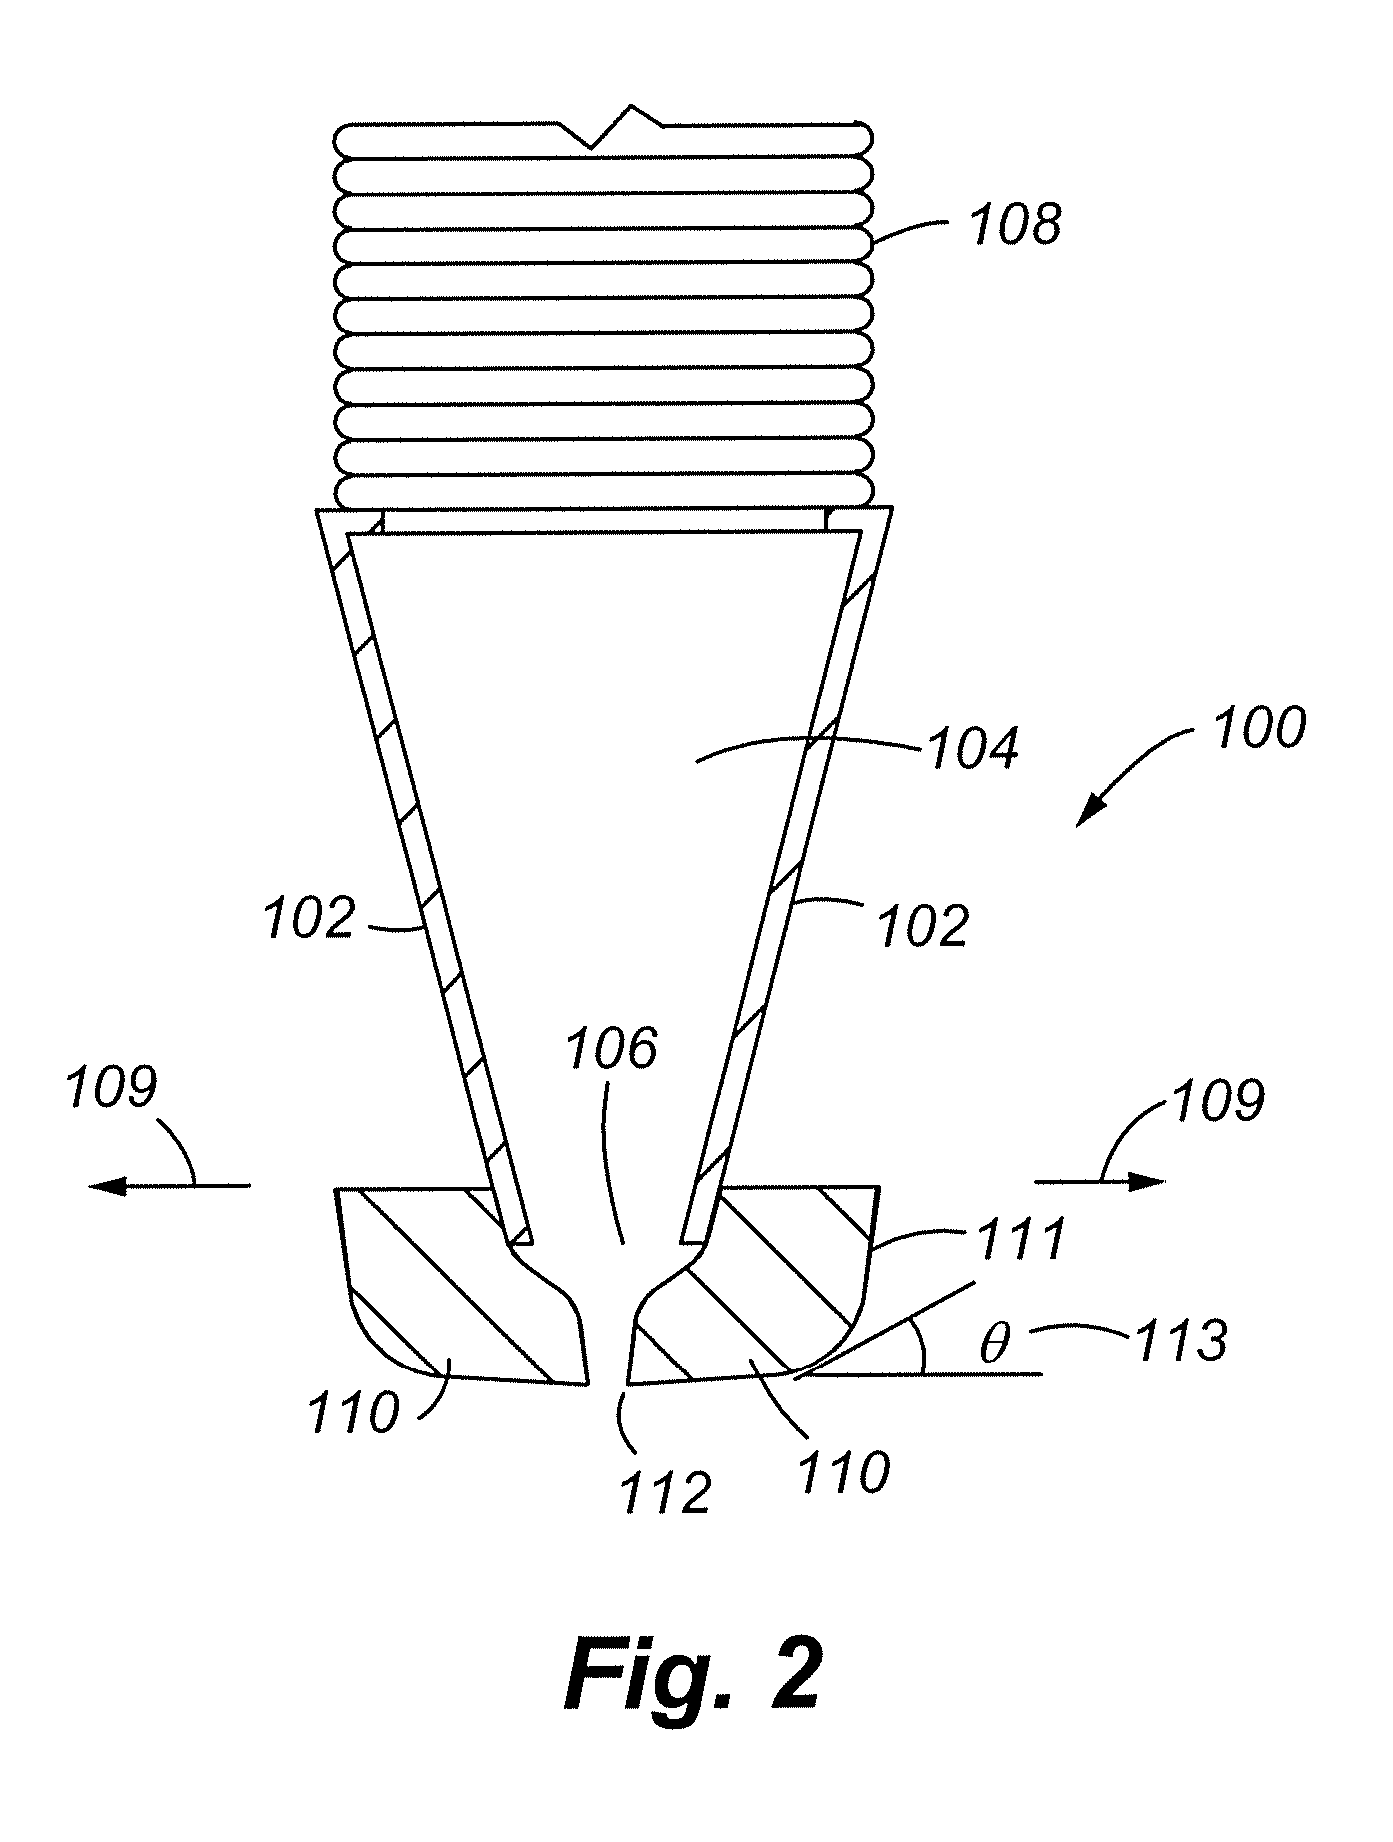 Flexible pickup lips for use with fixed vacuum shoes on self-contained and propelled carpet cleaning equipment